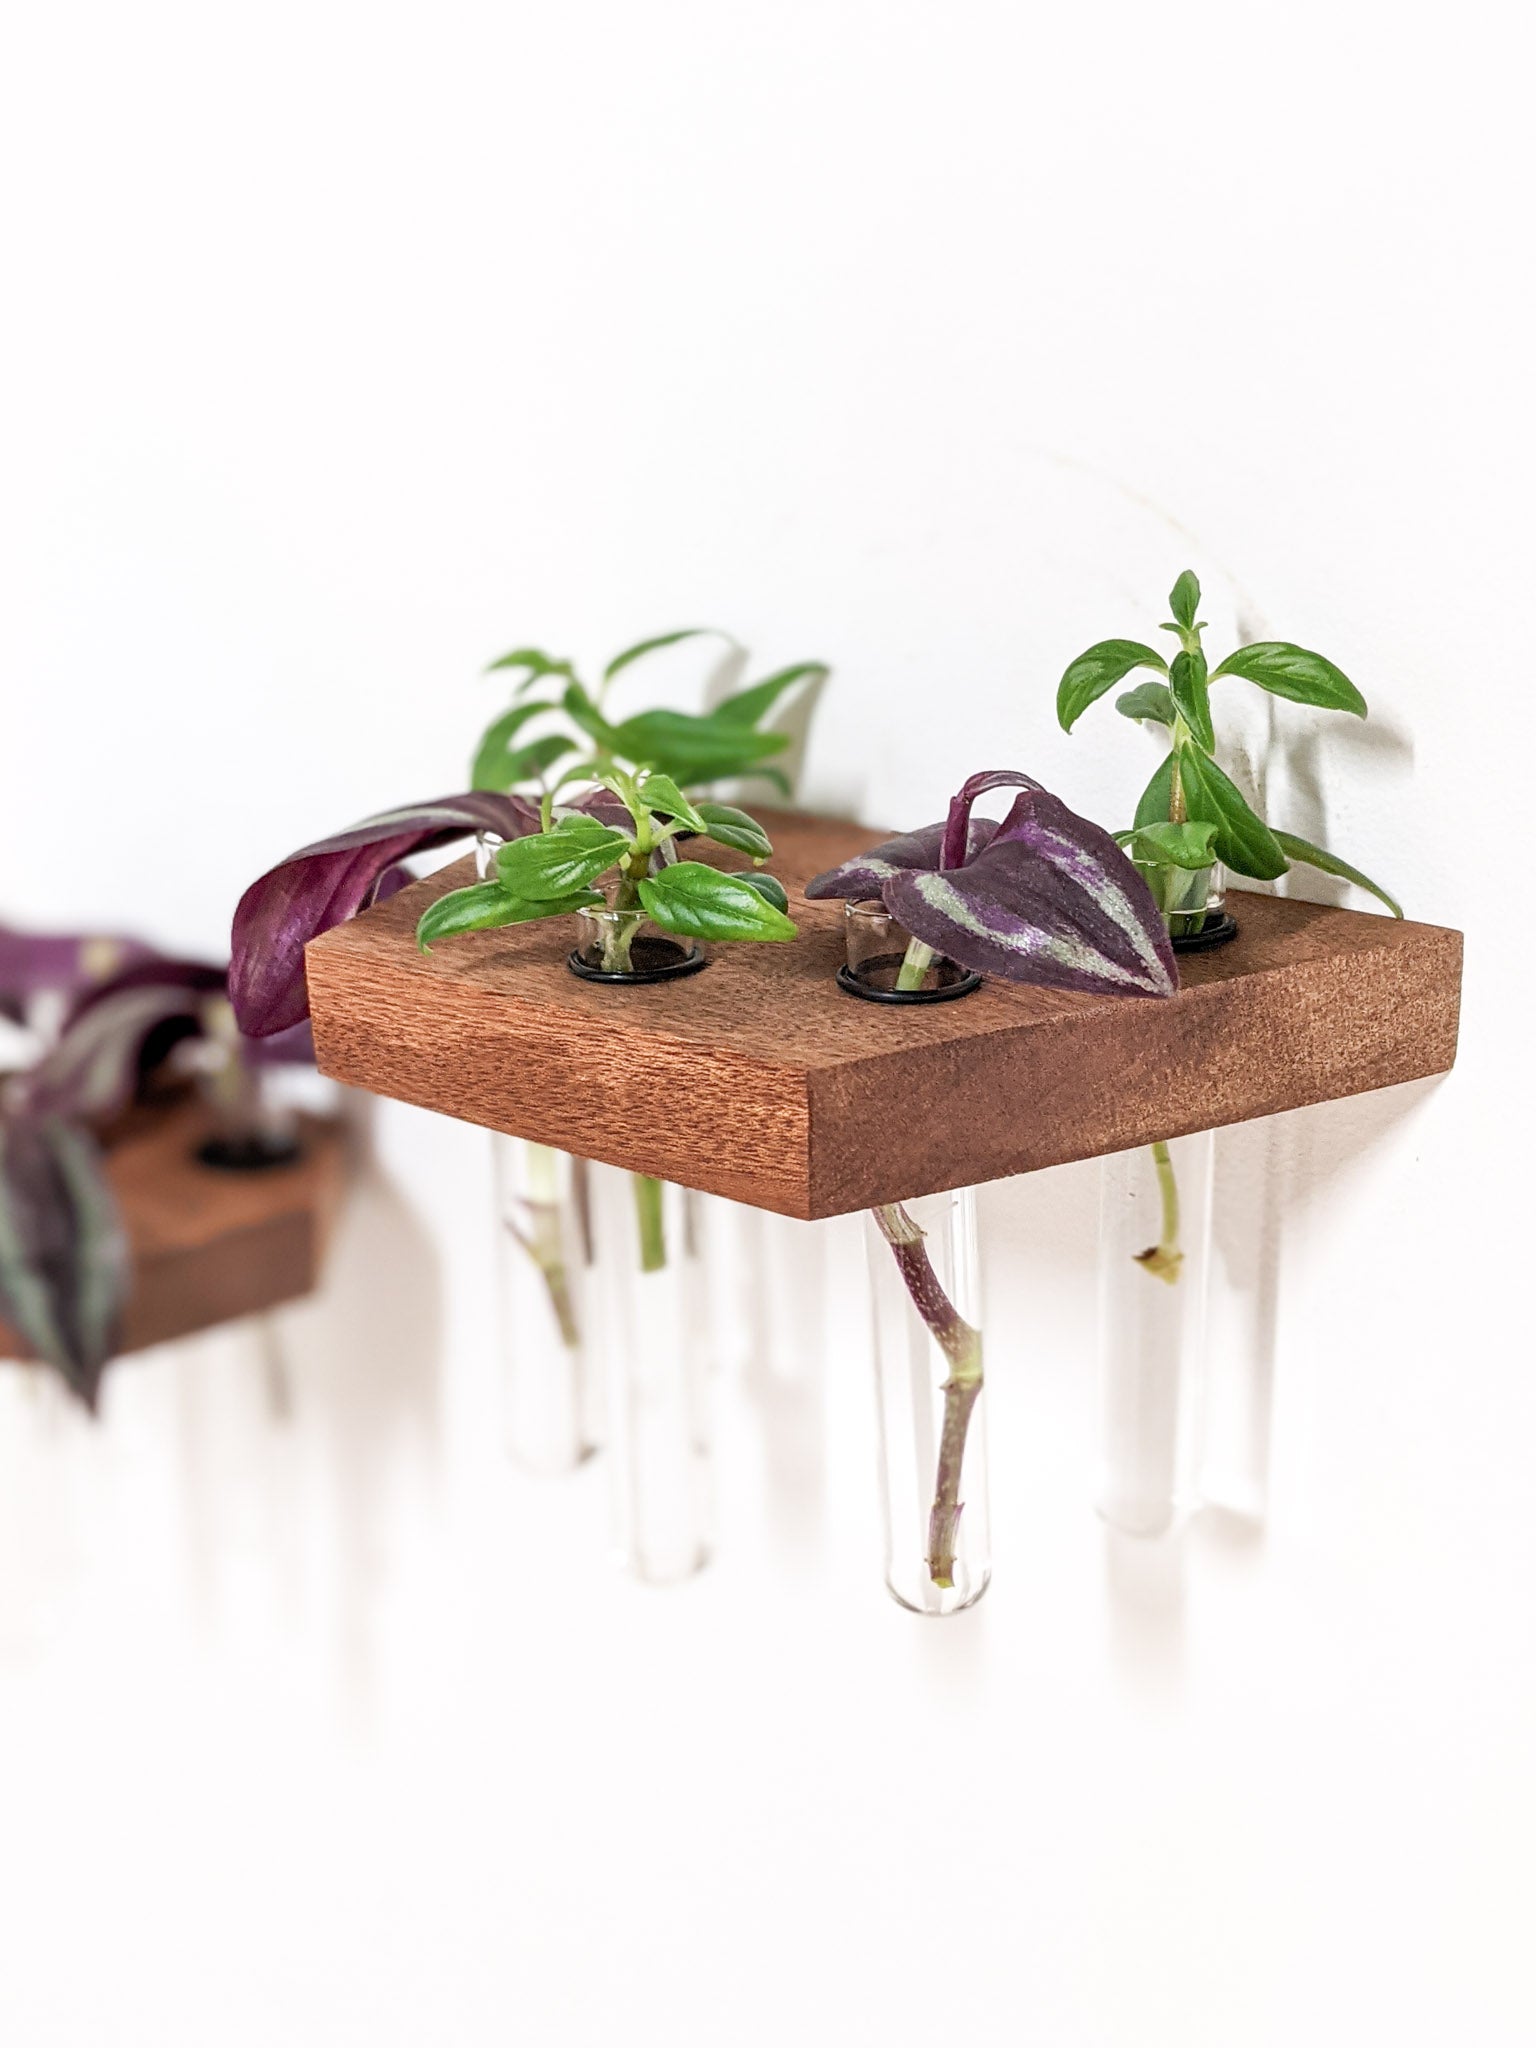 A trapezoid mahogany propagation shelf is wall mounted. Four test tubes dangle beneath the shelf and contain cutting of a wandering jew plant. To the left, the side of a mahogany octagon propagation shelf can be seen.